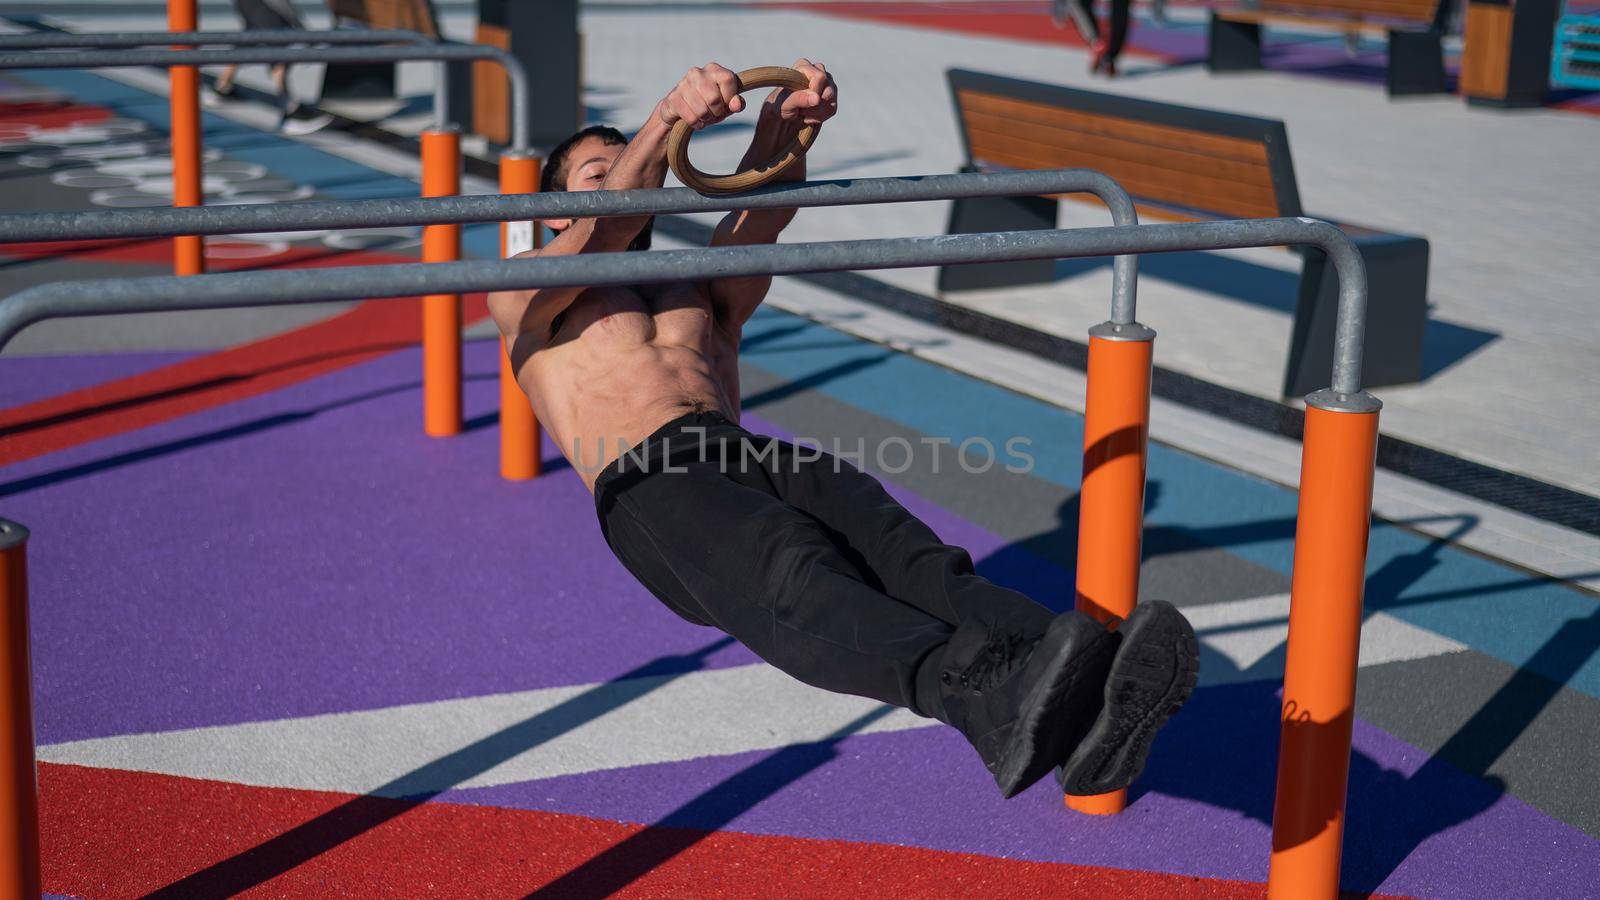 Shirtless man doing horizontal balance on parallel bars at sports ground. by mrwed54